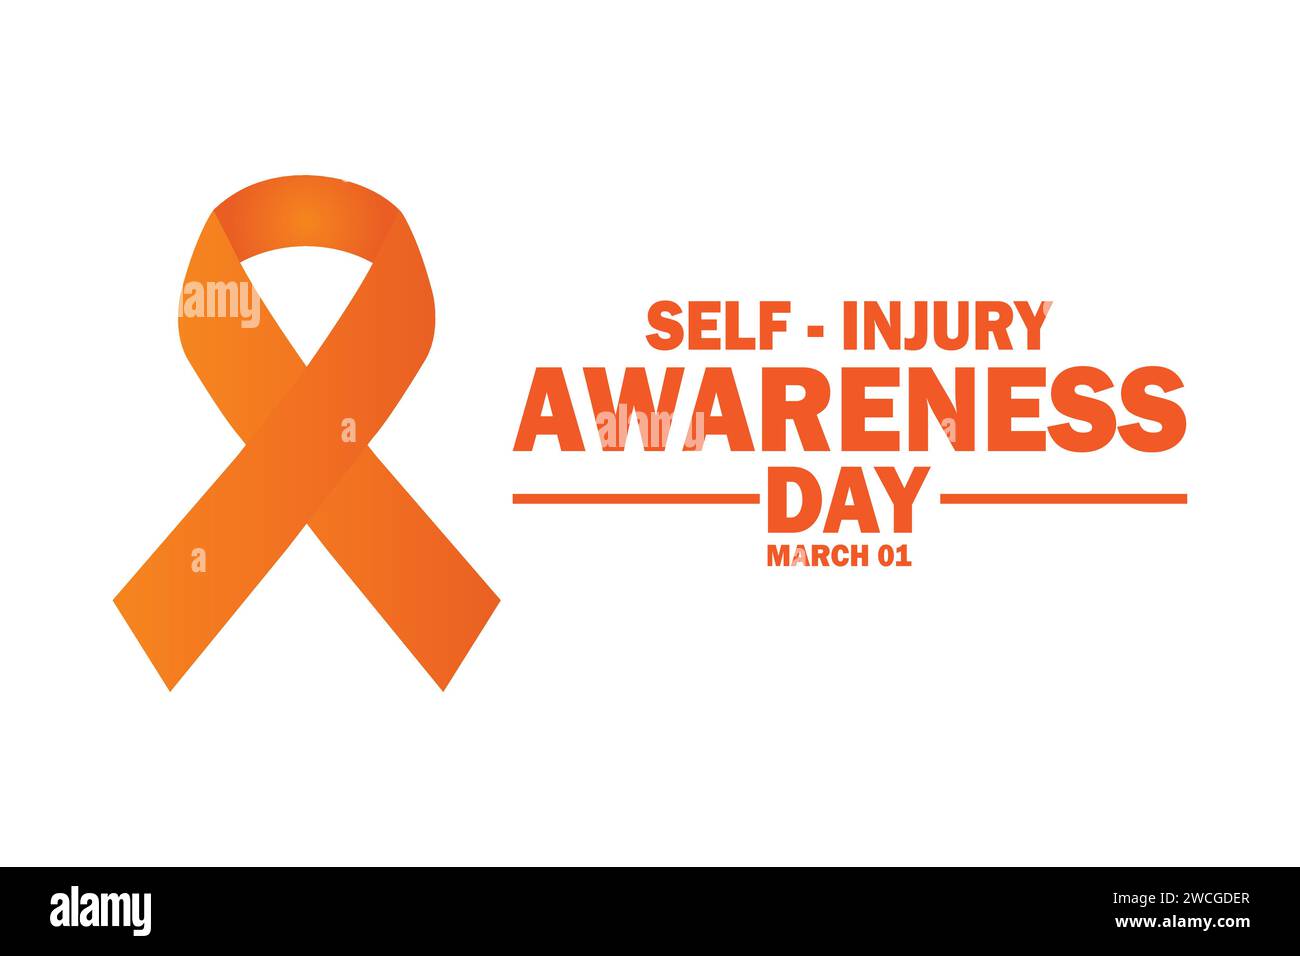 Self Injury Awareness Day Vector illustration. March 01. Holiday concept. Template for background, banner, card, poster with text inscription. Stock Vector